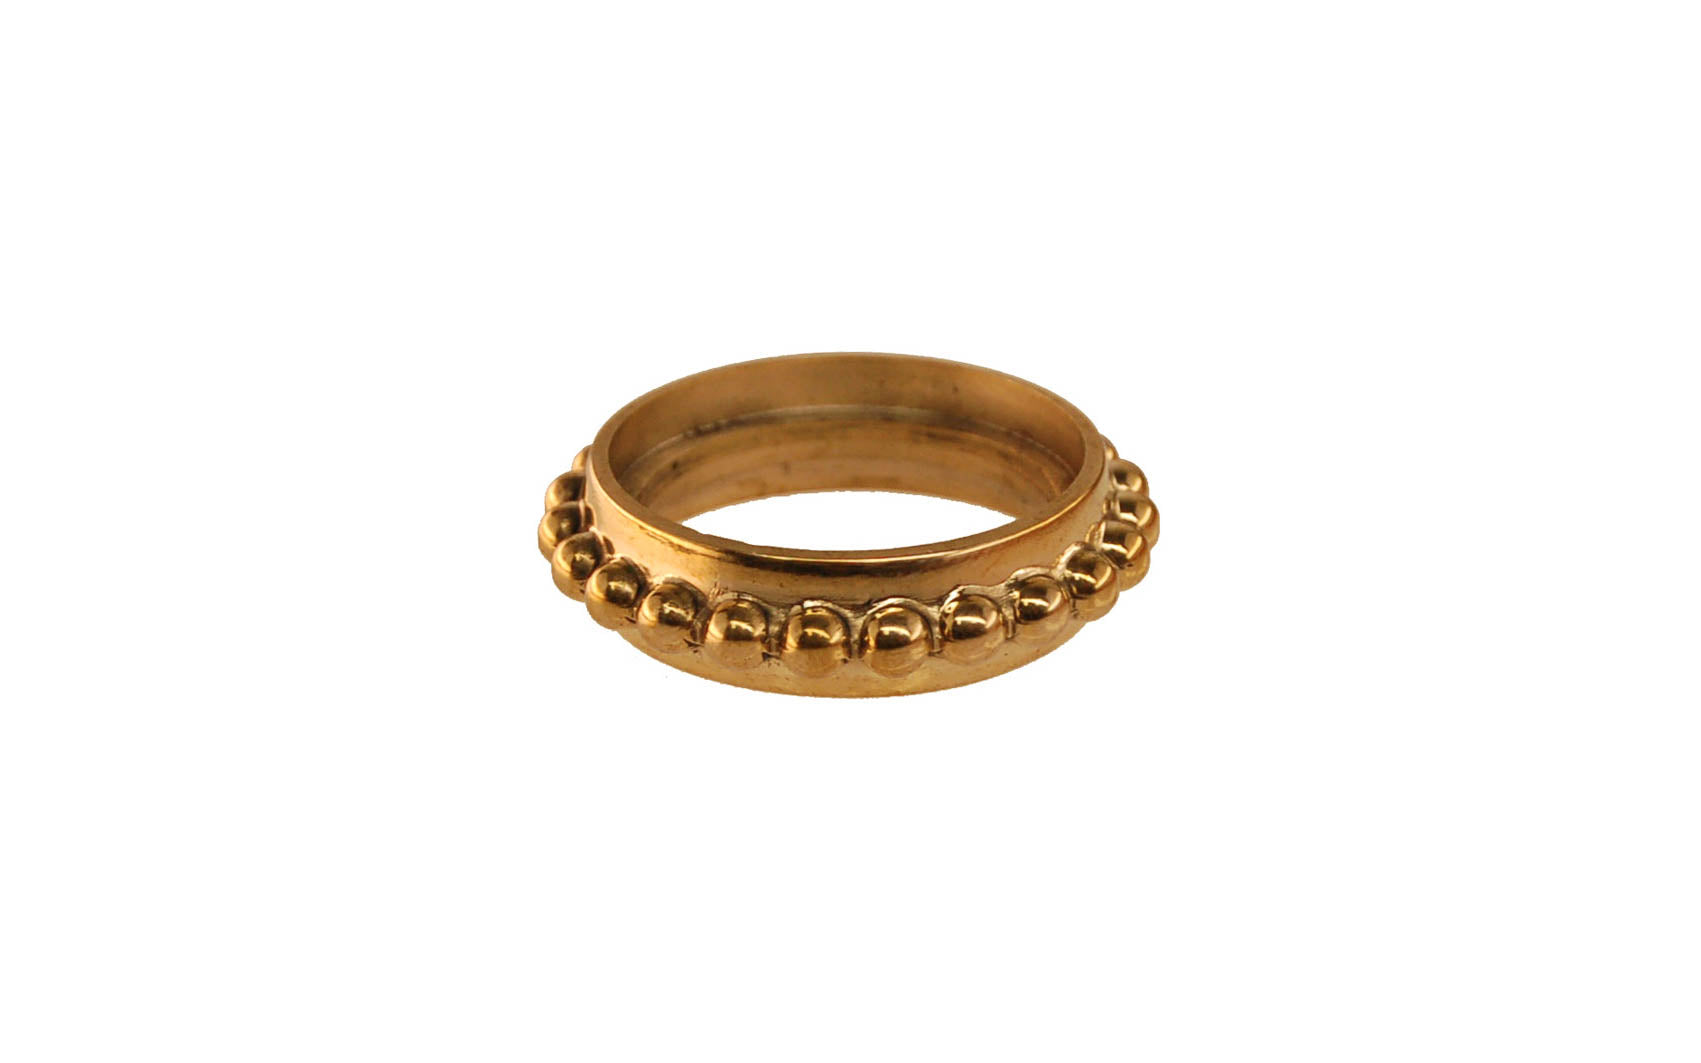 Solid Brass Caster Ring With Beaded Design ~ Non-Lacquered Brass (will patina over time)